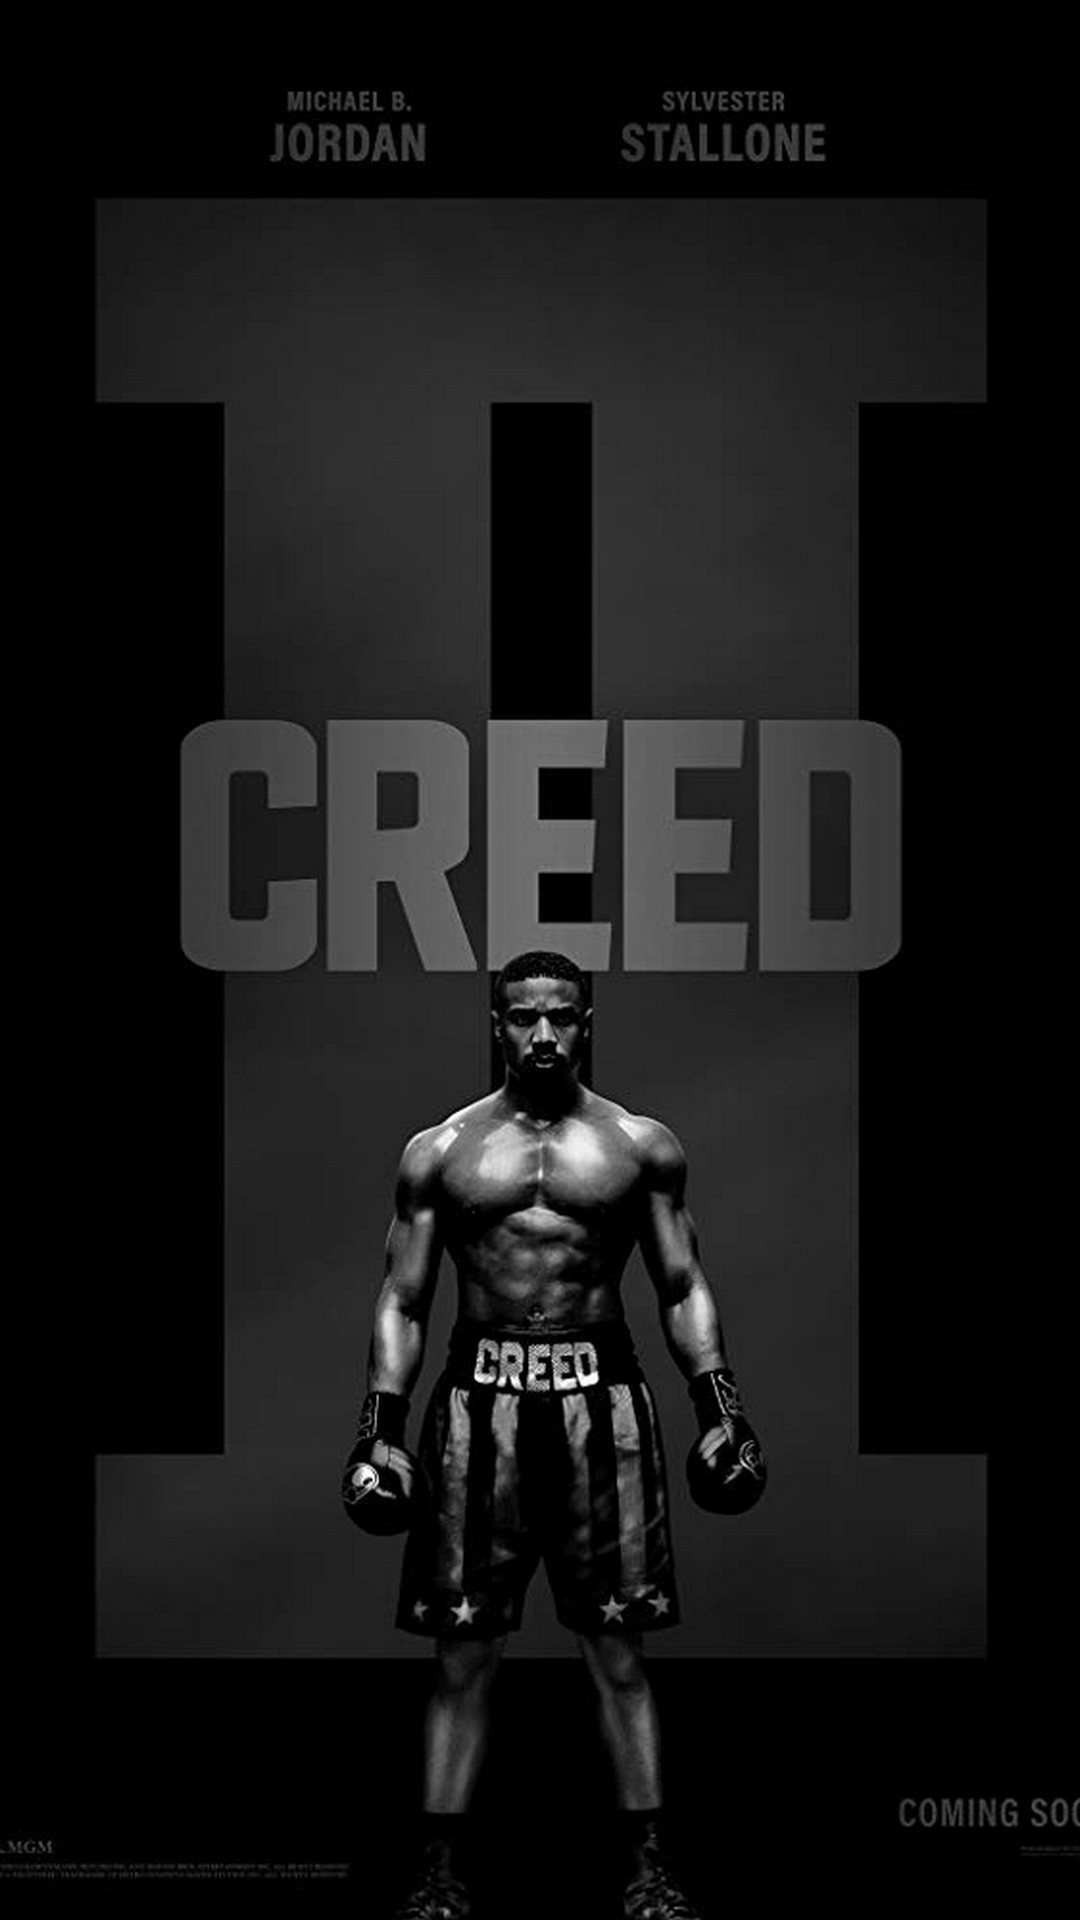 Creed 2 Wallpapers